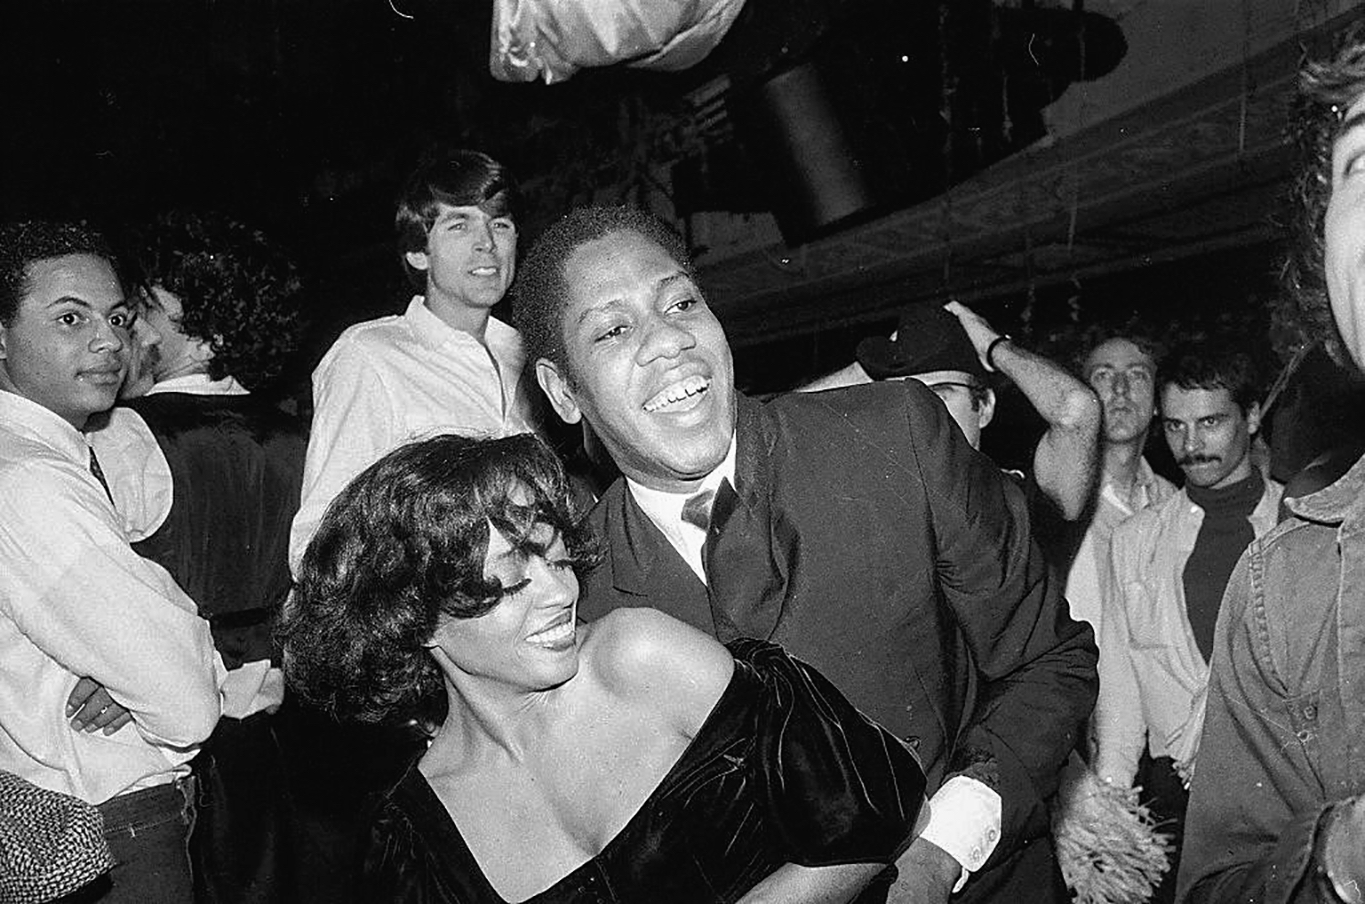 NEW YORK, NY - 1979: Diana Ross and Andre Leon Talley dancing at Studio 54, c 1979 in New York City. (Photo by Sonia Moskowitz/Getty Images)